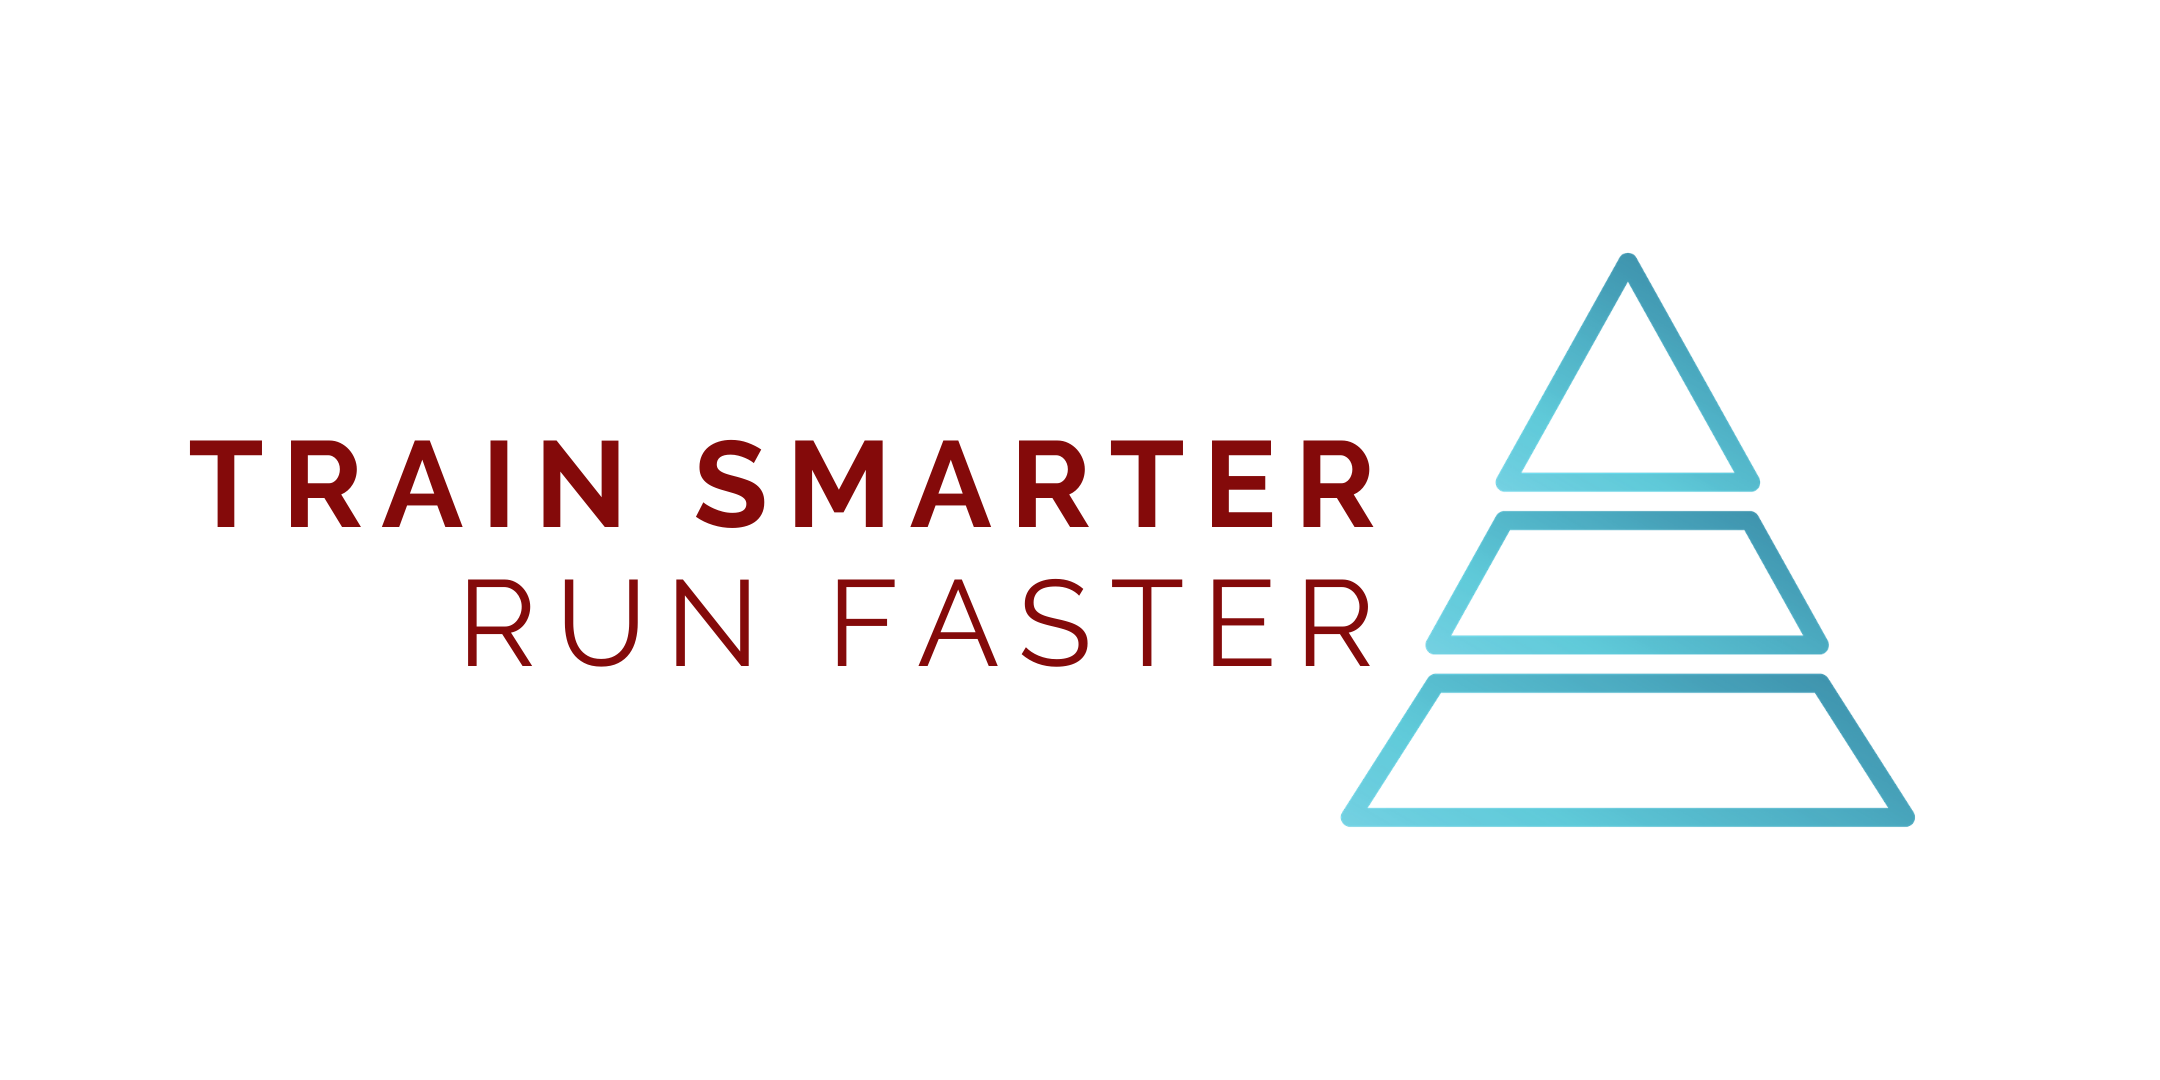 How To Run Faster: Advice From Coaches